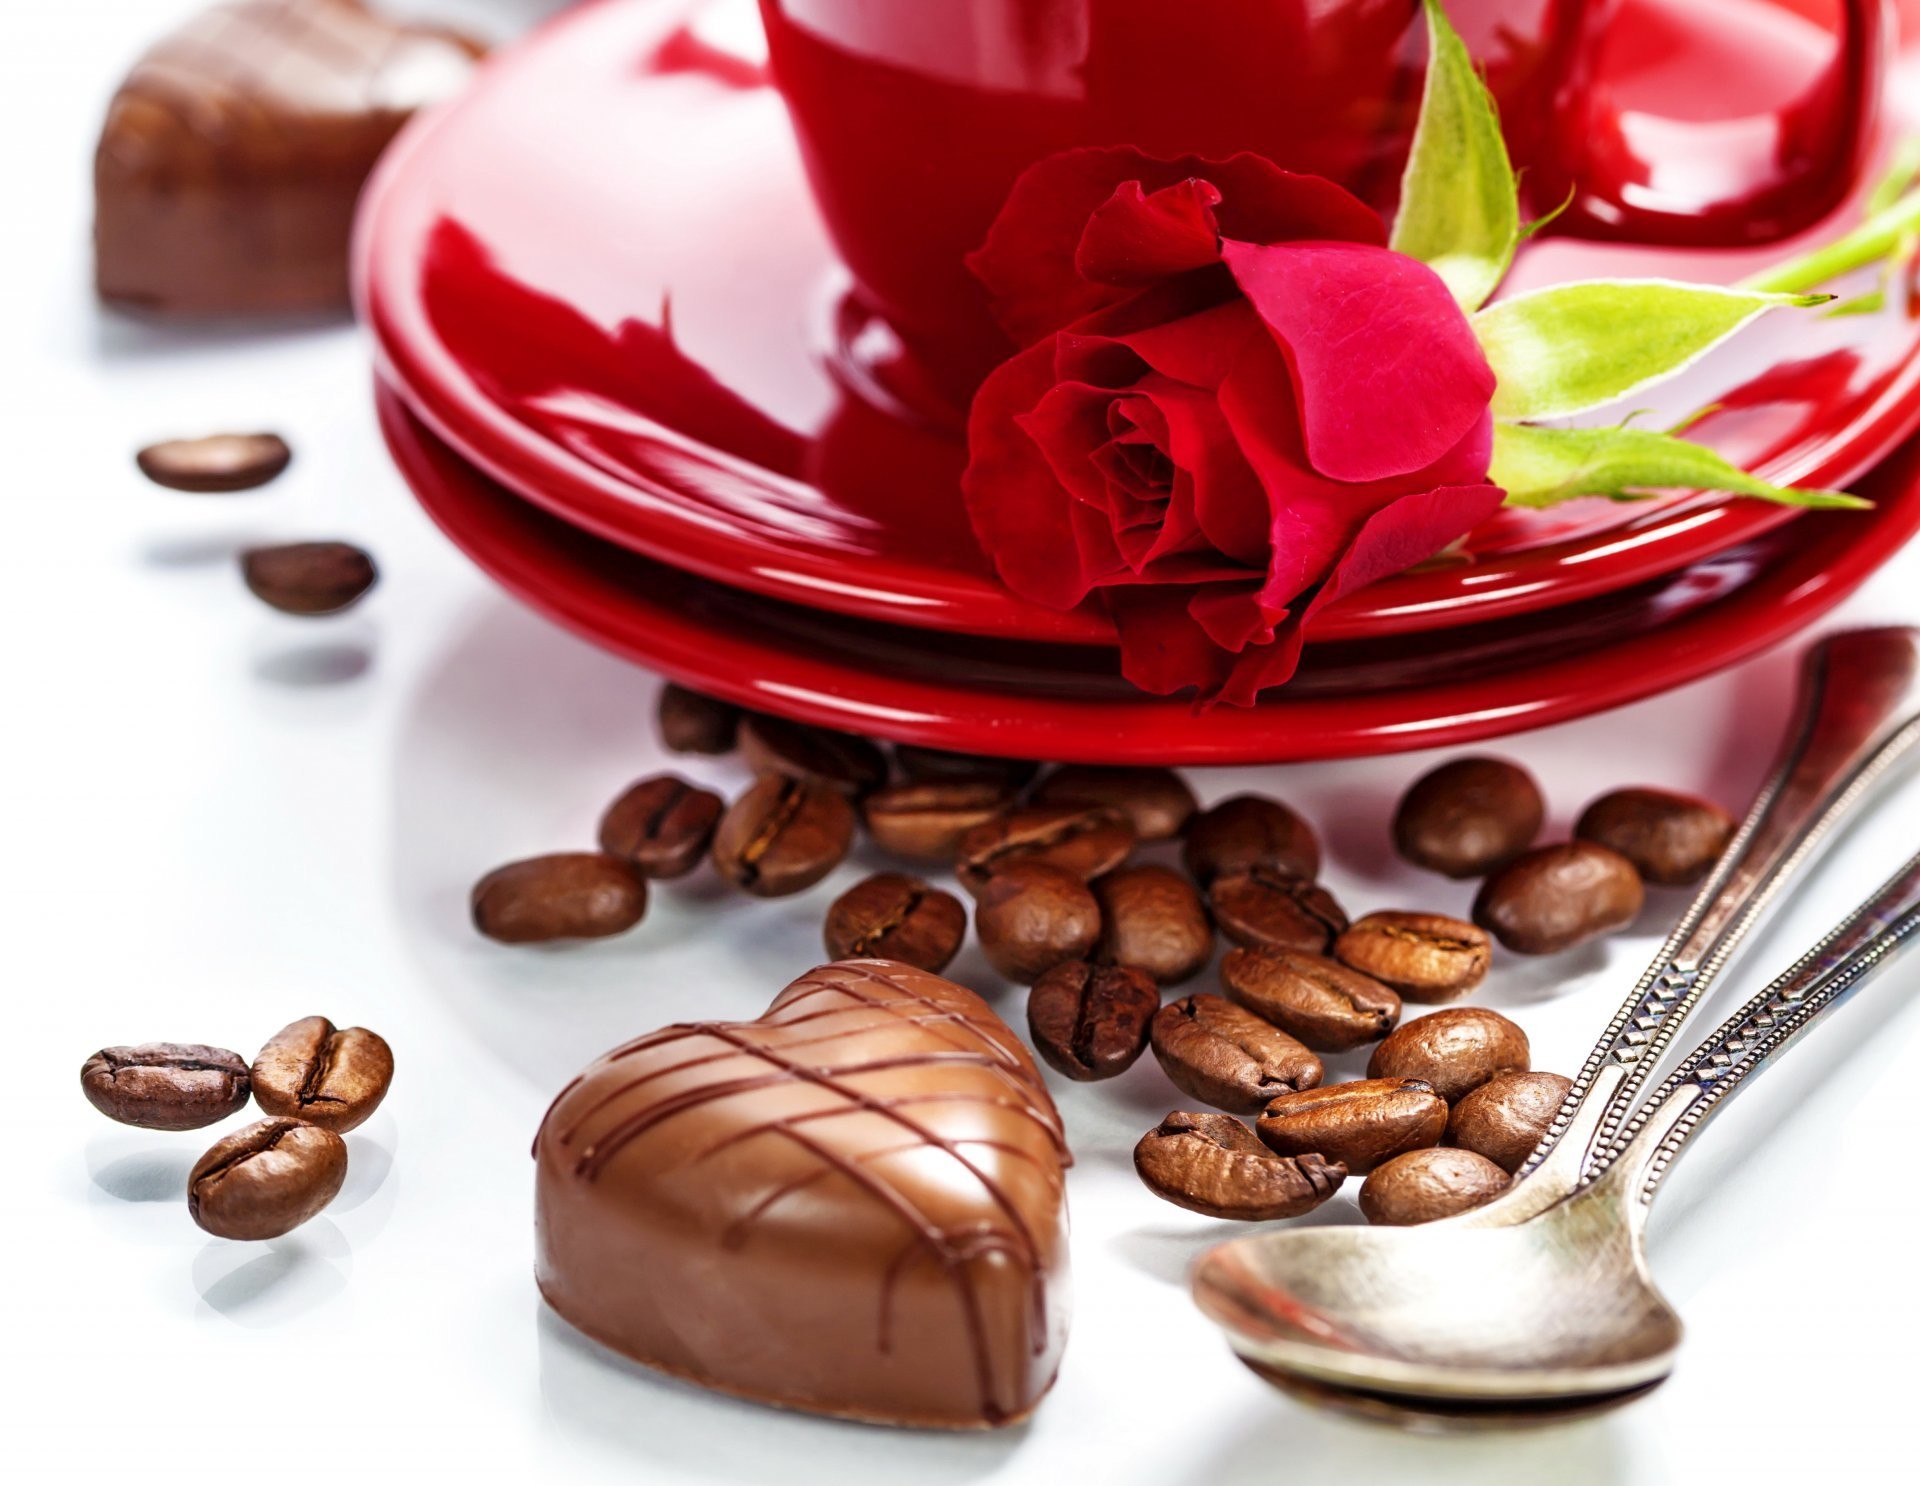 1920x1486 valentine's day love heart romantic roses rose heart candy chocolate coffee  dish spoon